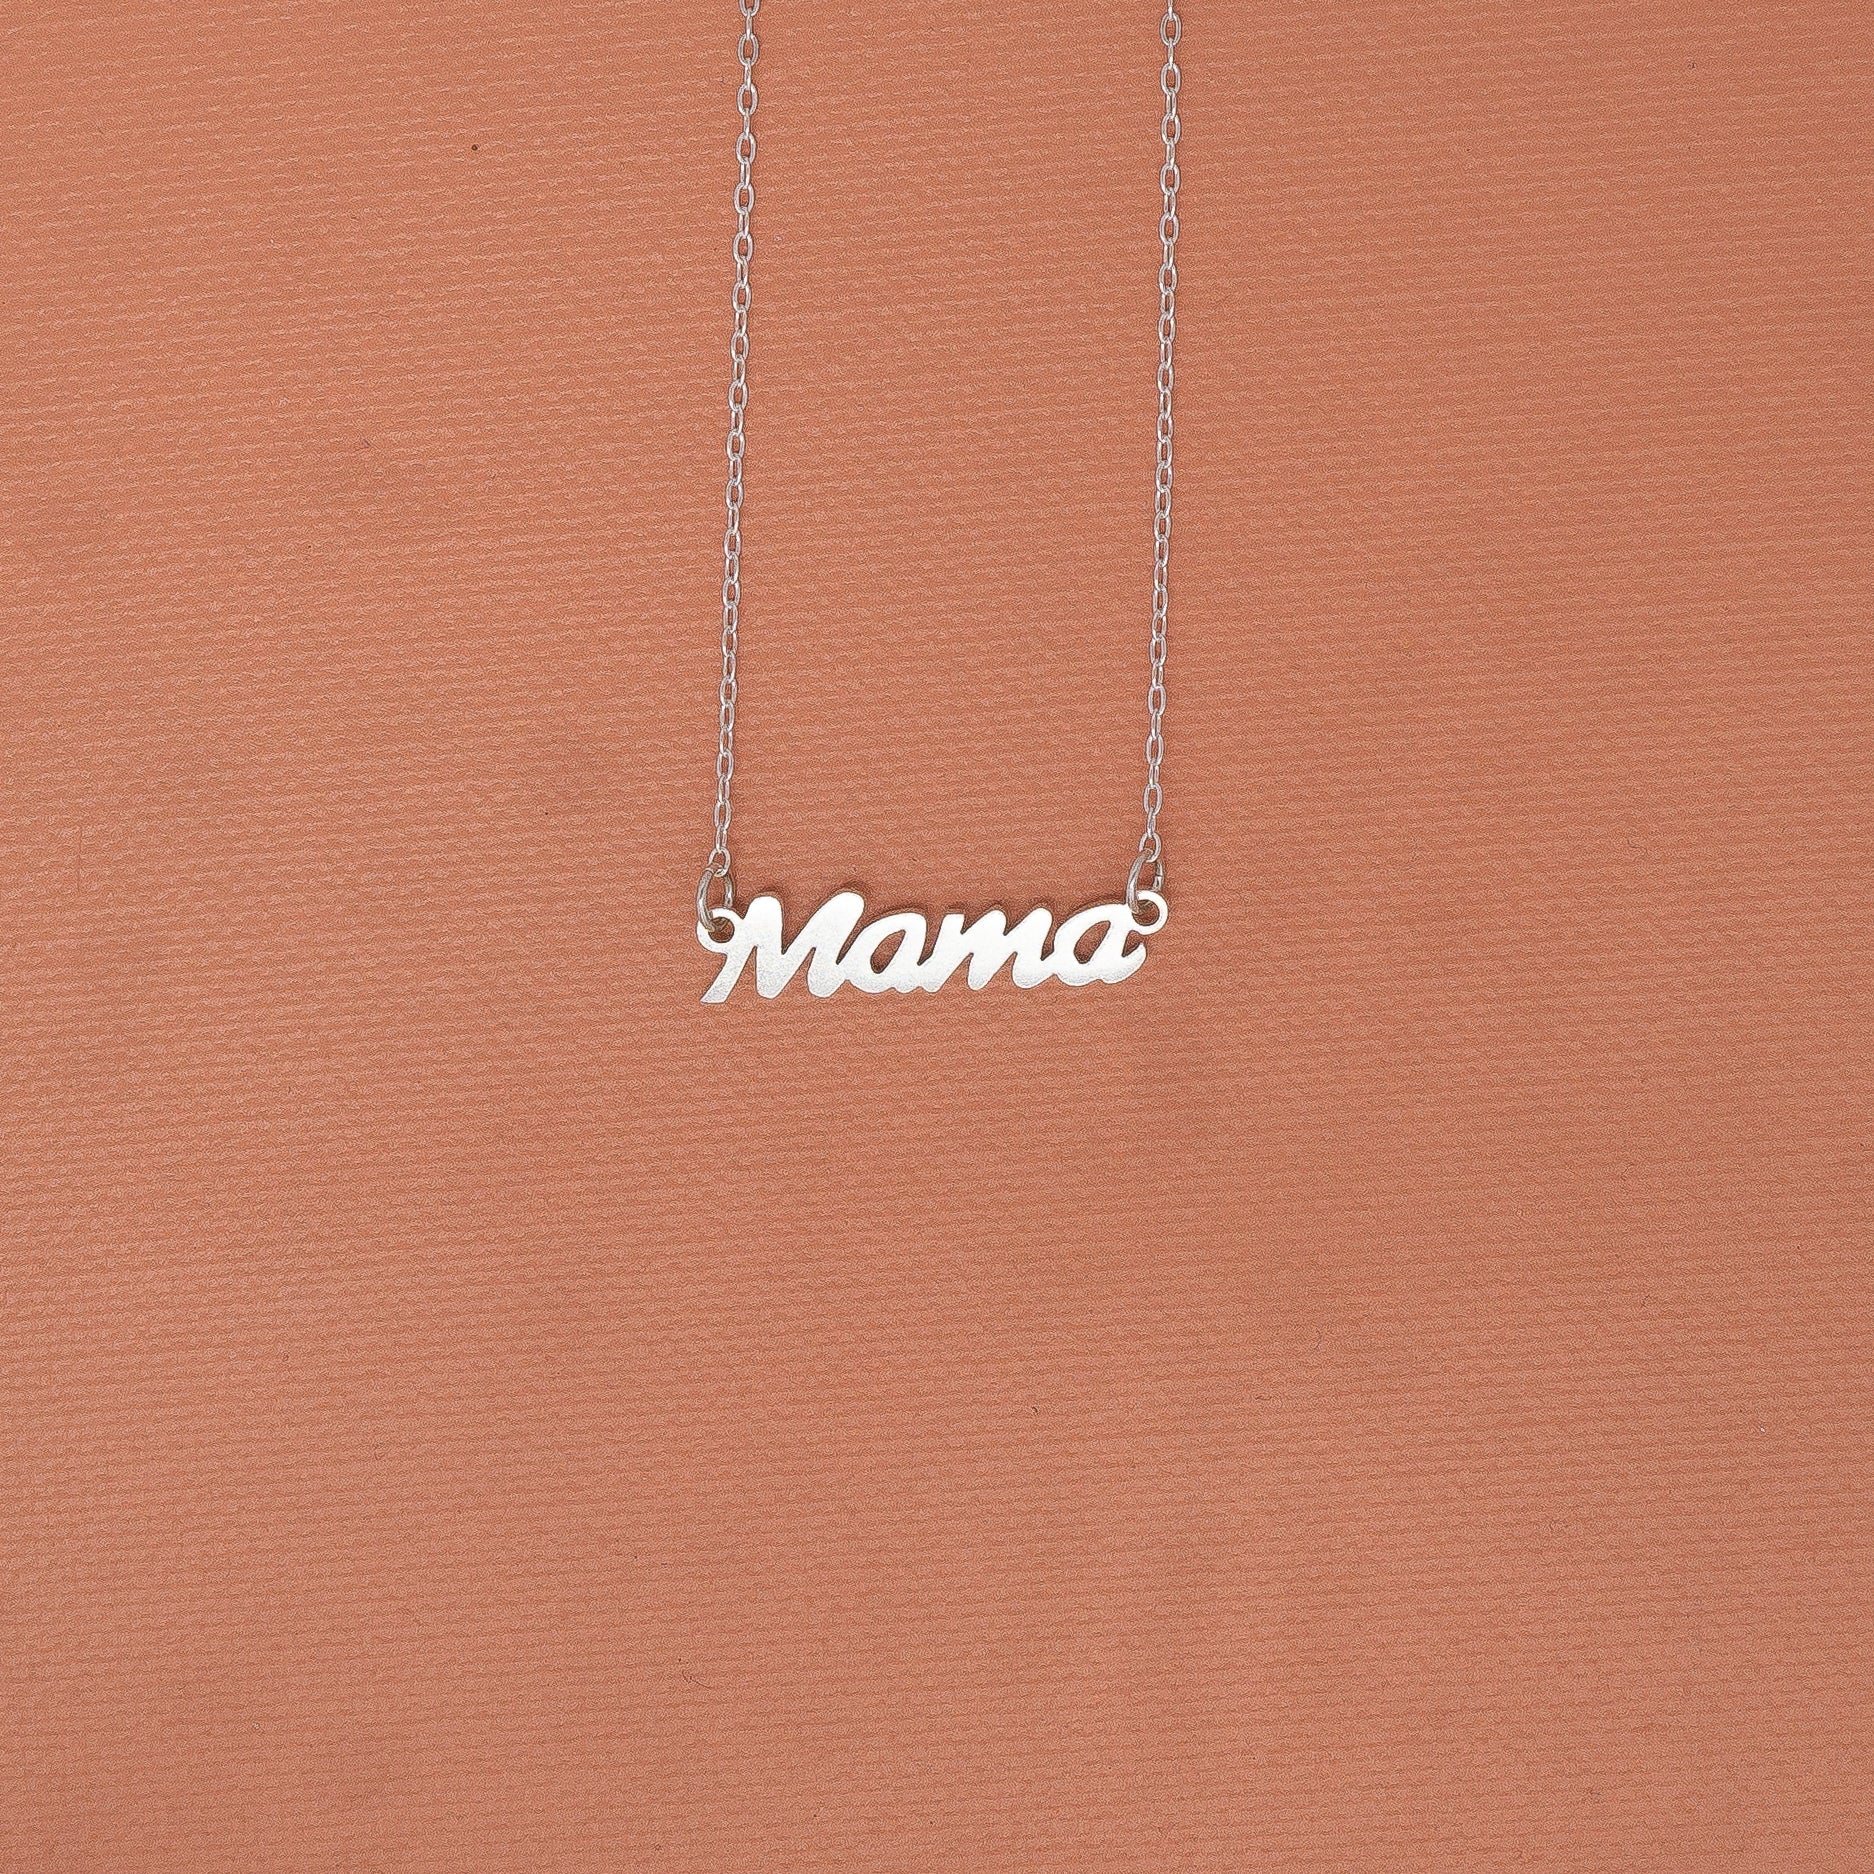 Mama Pendant in Silver - emme